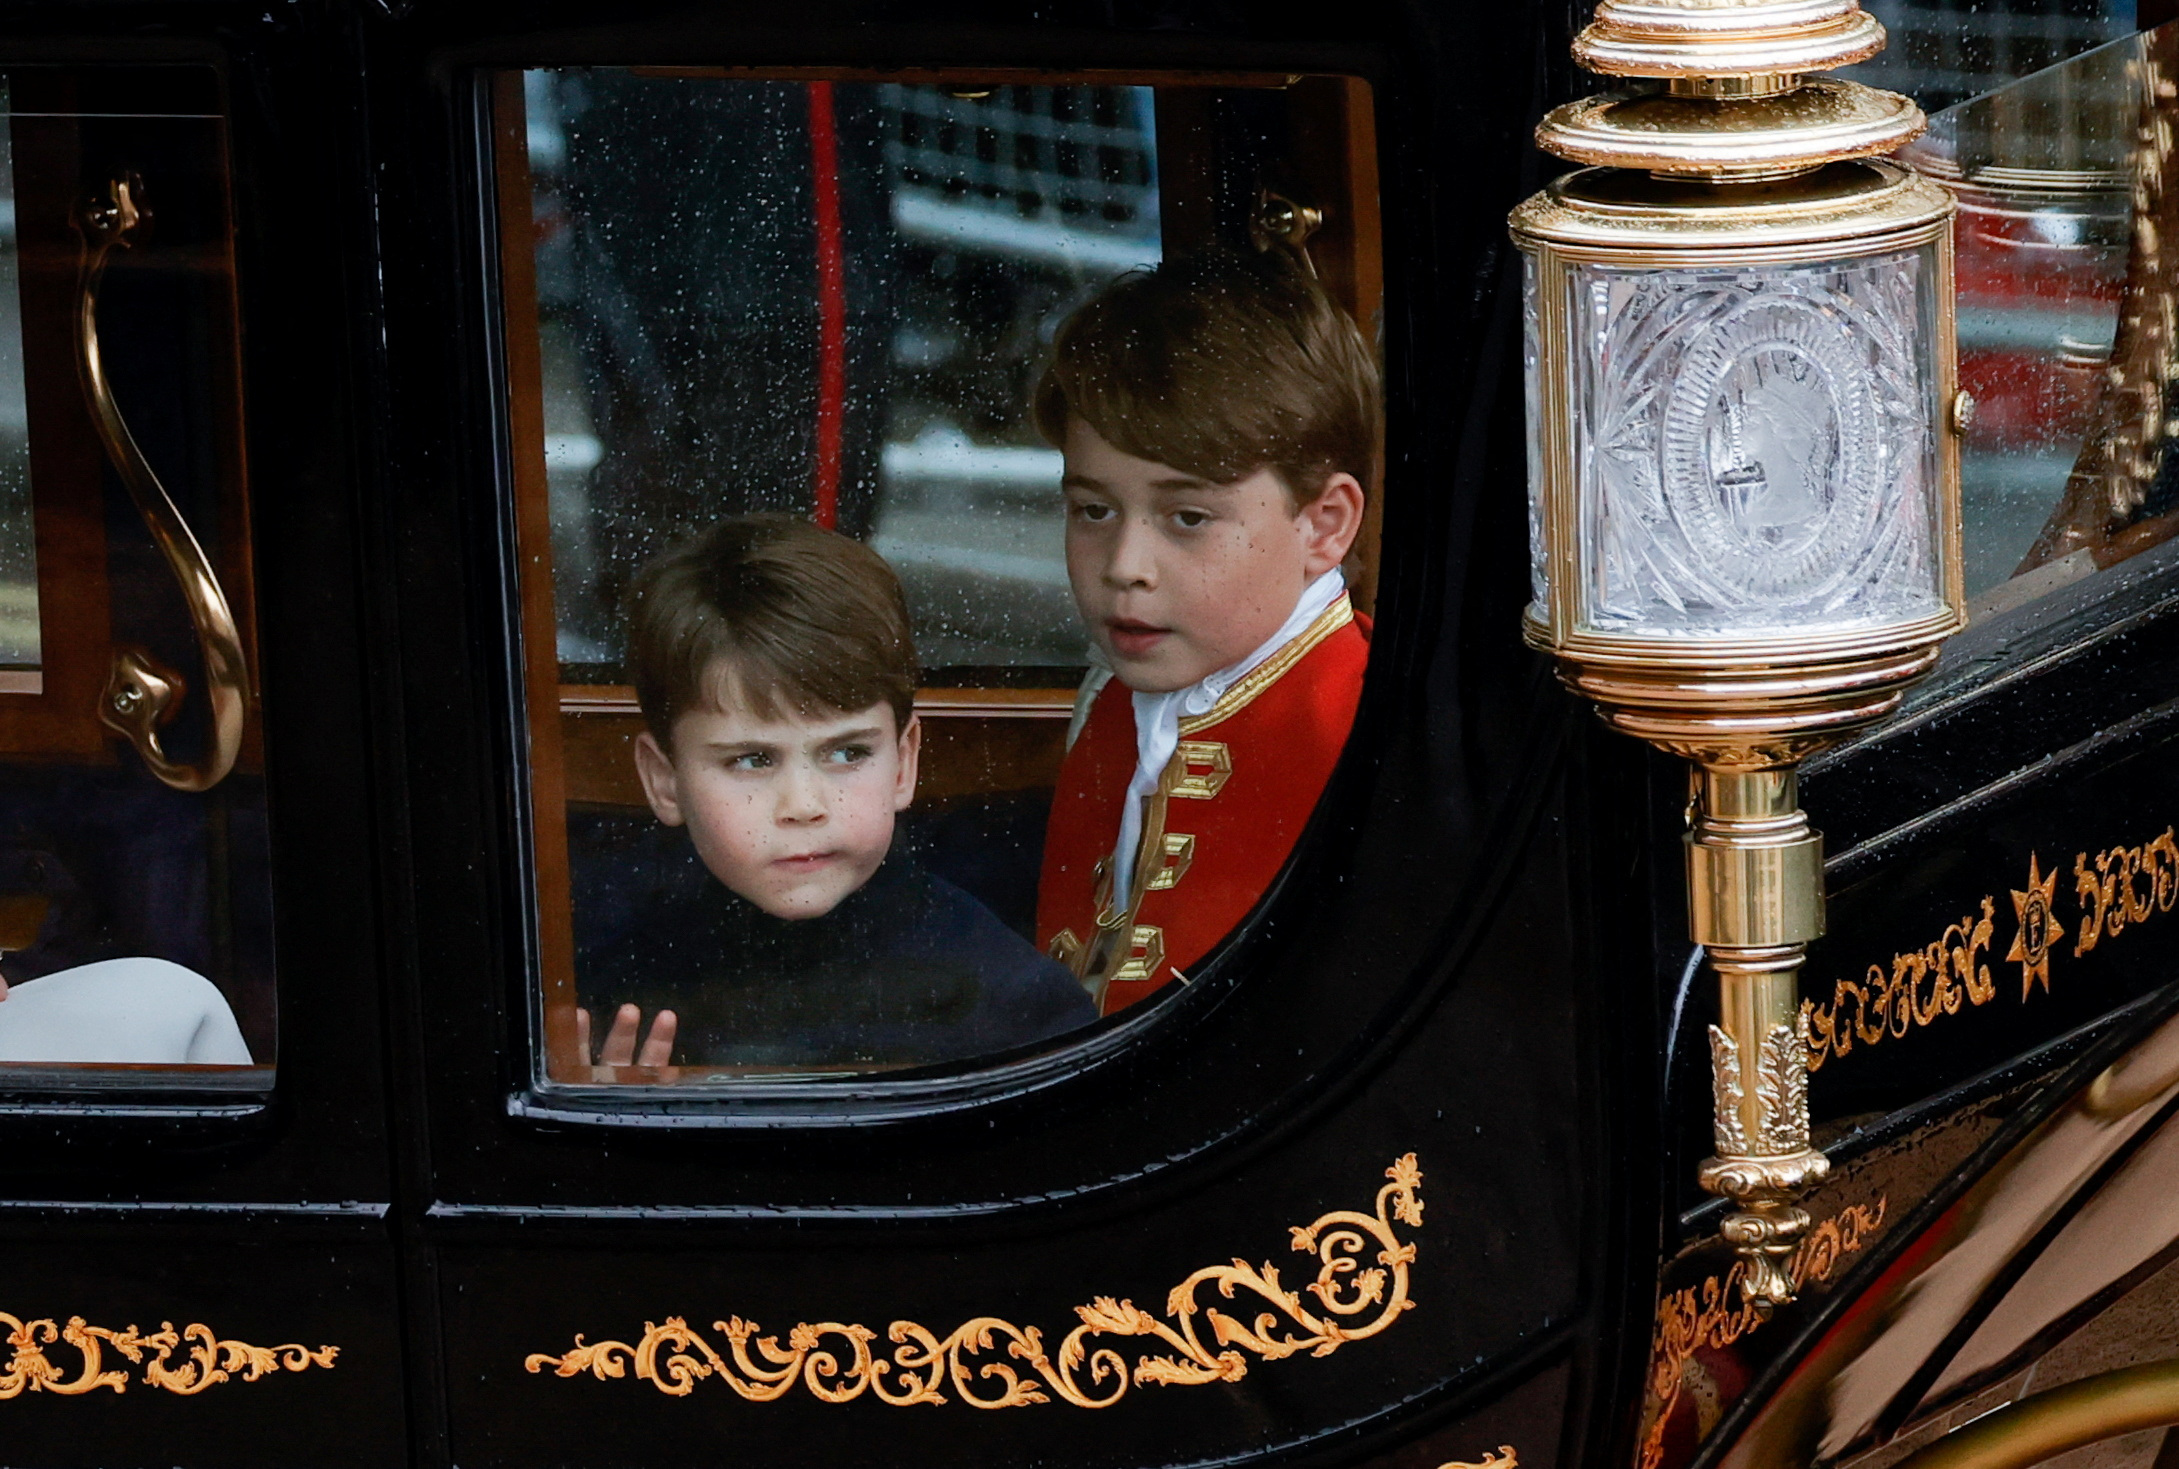 <p>Prince Louis and big brother Prince George traveled towards Buckingham Palace in a coach following <a href="https://www.wonderwall.com/celebrity/the-coronation-of-king-charles-iii-and-queen-camilla-the-best-pictures-of-all-the-royals-at-this-historic-event-735015.gallery">the coronation</a> of King Charles III and Queen Camilla at Westminster Abbey in London on May 6, 2023.</p>